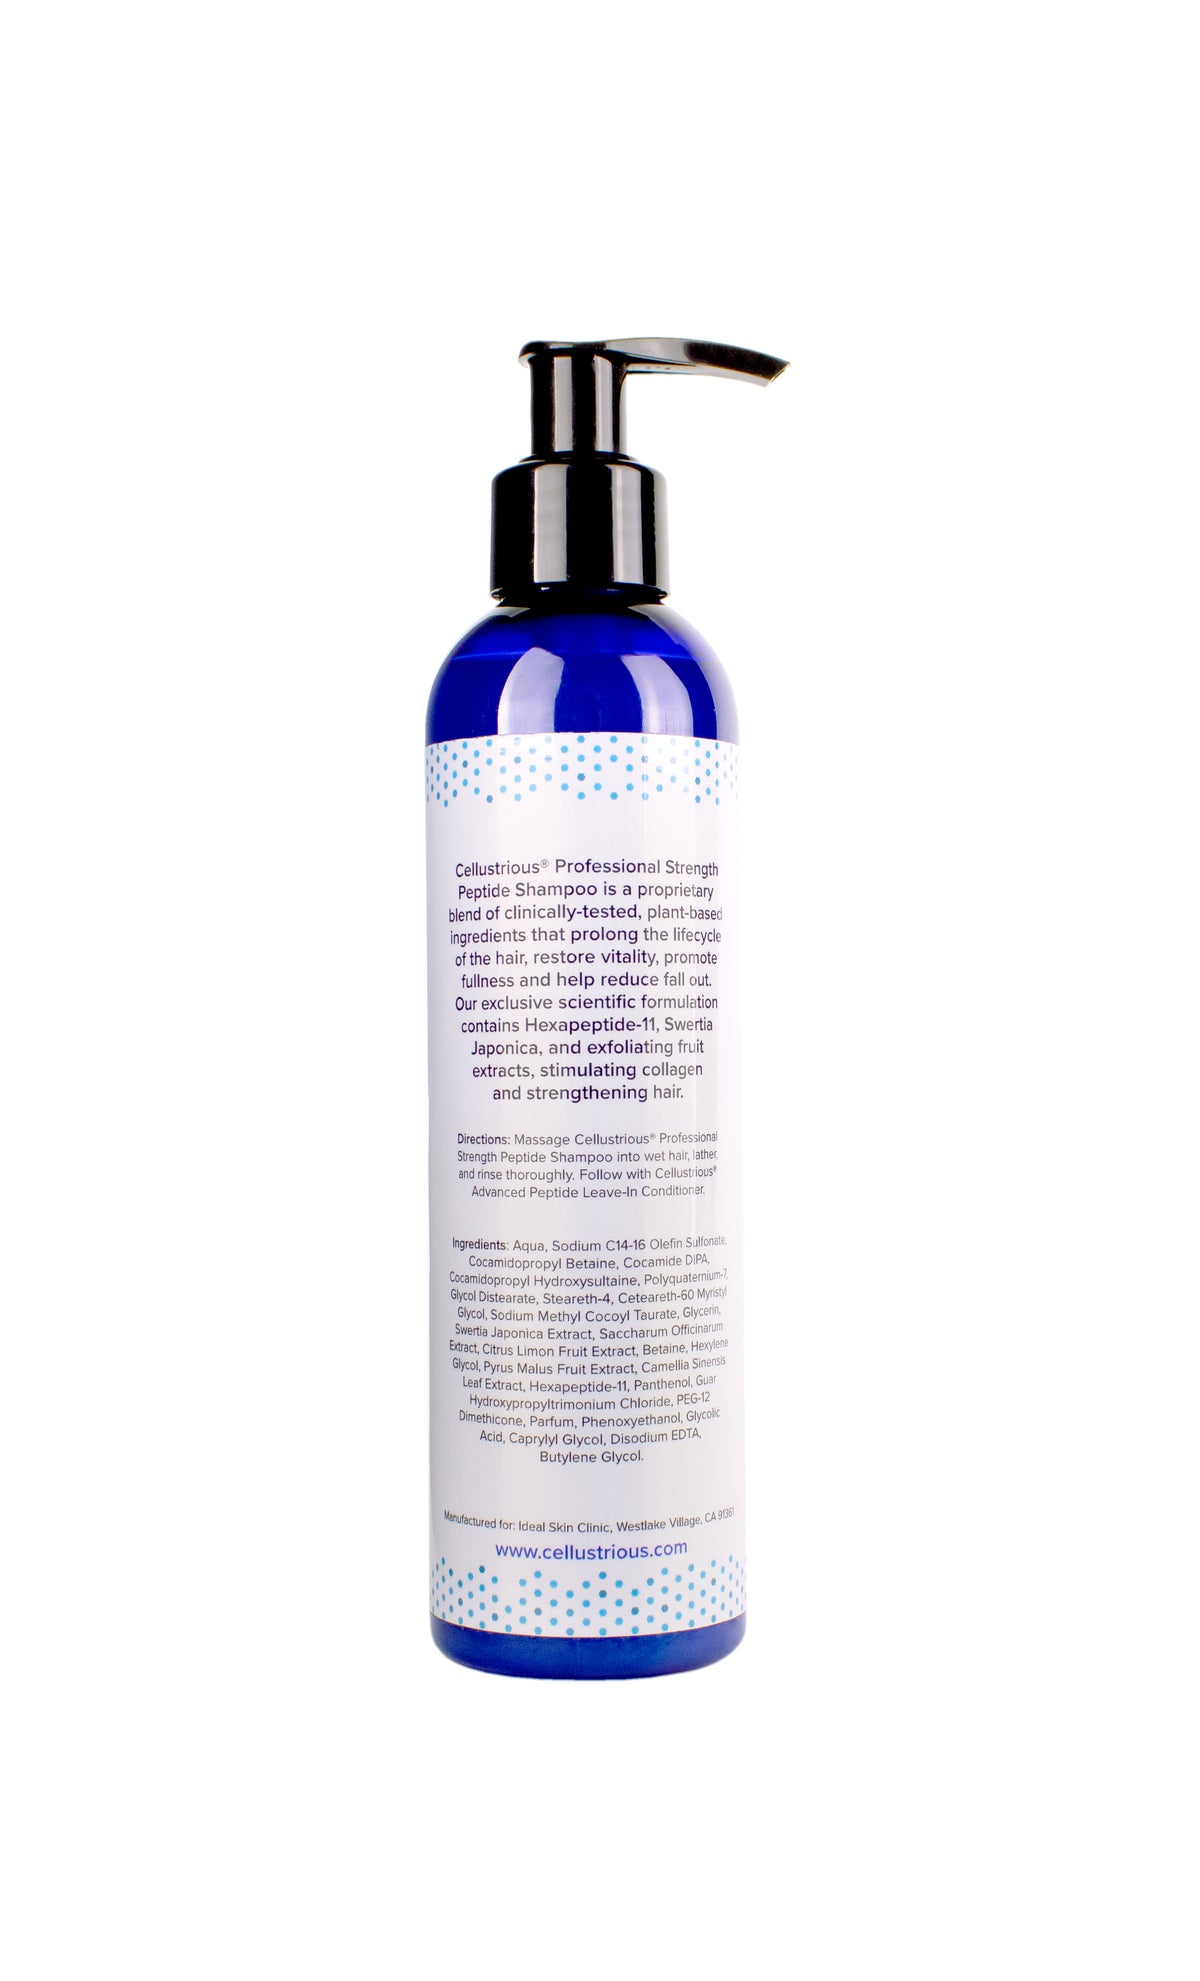 Cellustrious Professional Strength Peptide Shampoo back